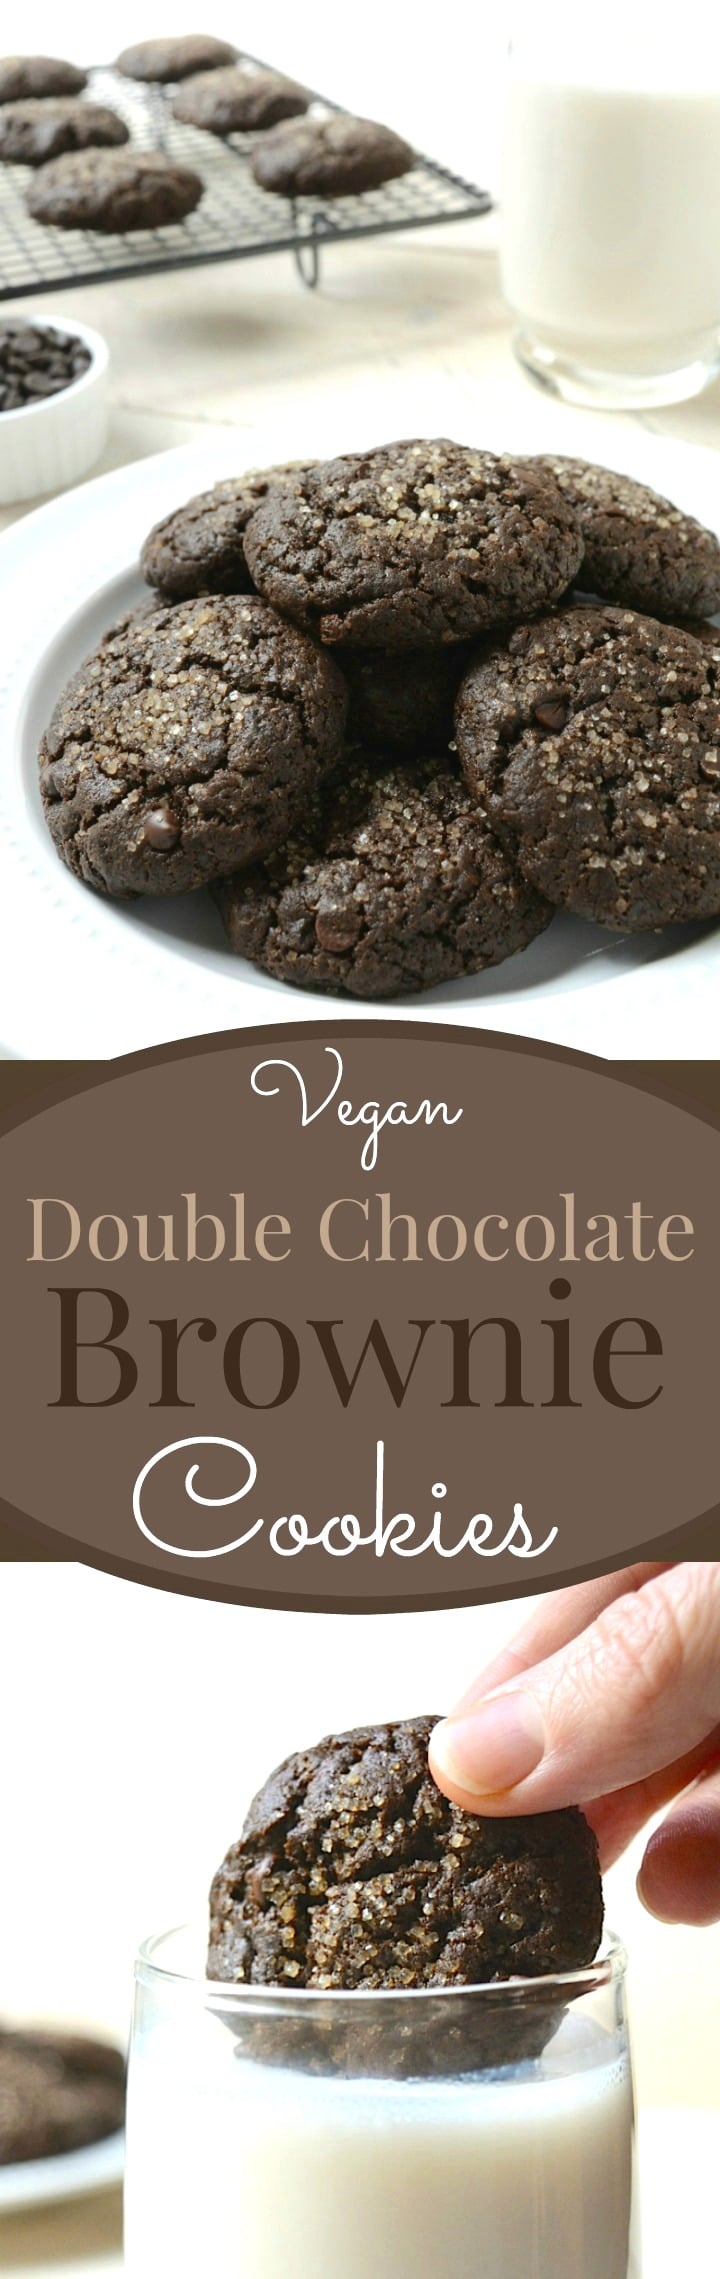 Vegan Double Chocolate Brownie Cookies are a decadent brownie crammed into a cookie then loaded with chocolate chips. They are egg-free, dairy-free and made with 8 simple ingredients you probably have on hand!